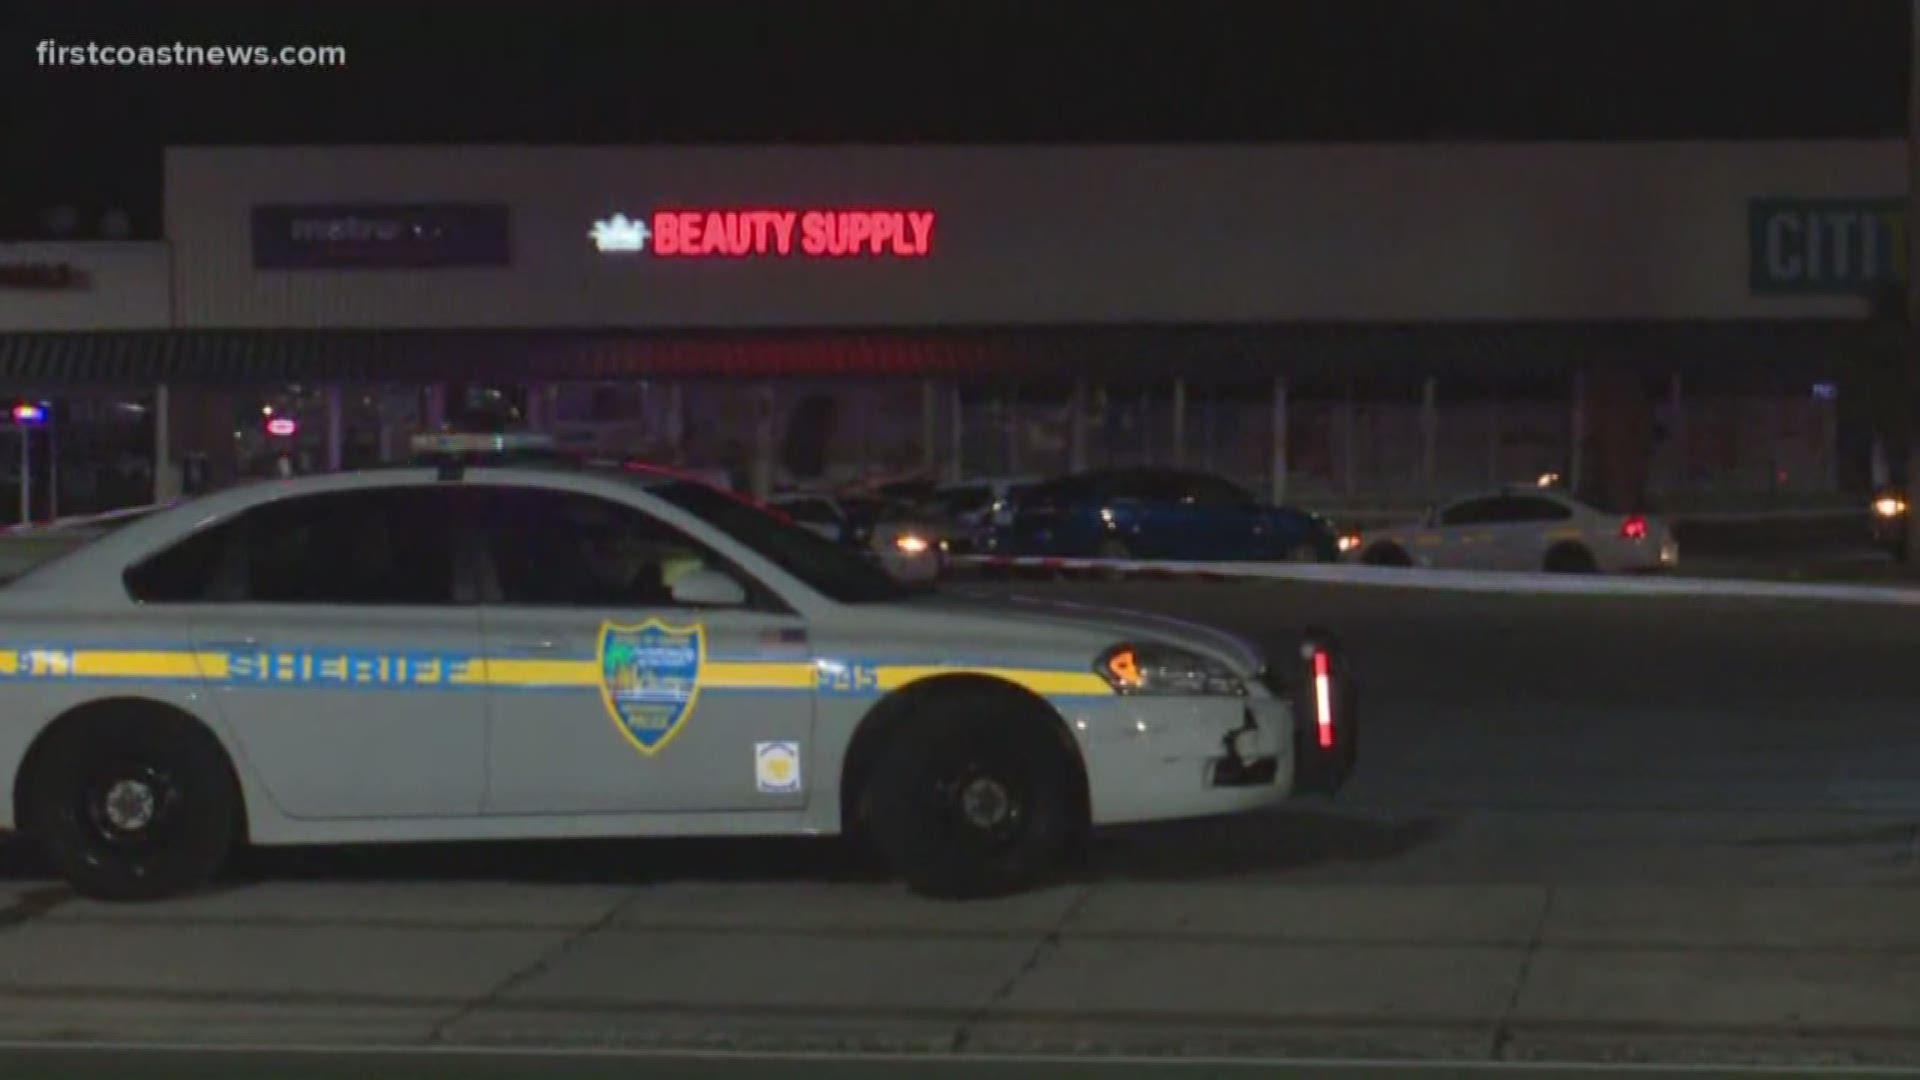 A man was shot dead inside a vehicle at a Jacksonville shopping plaza while two juveniles sat in the backseat.